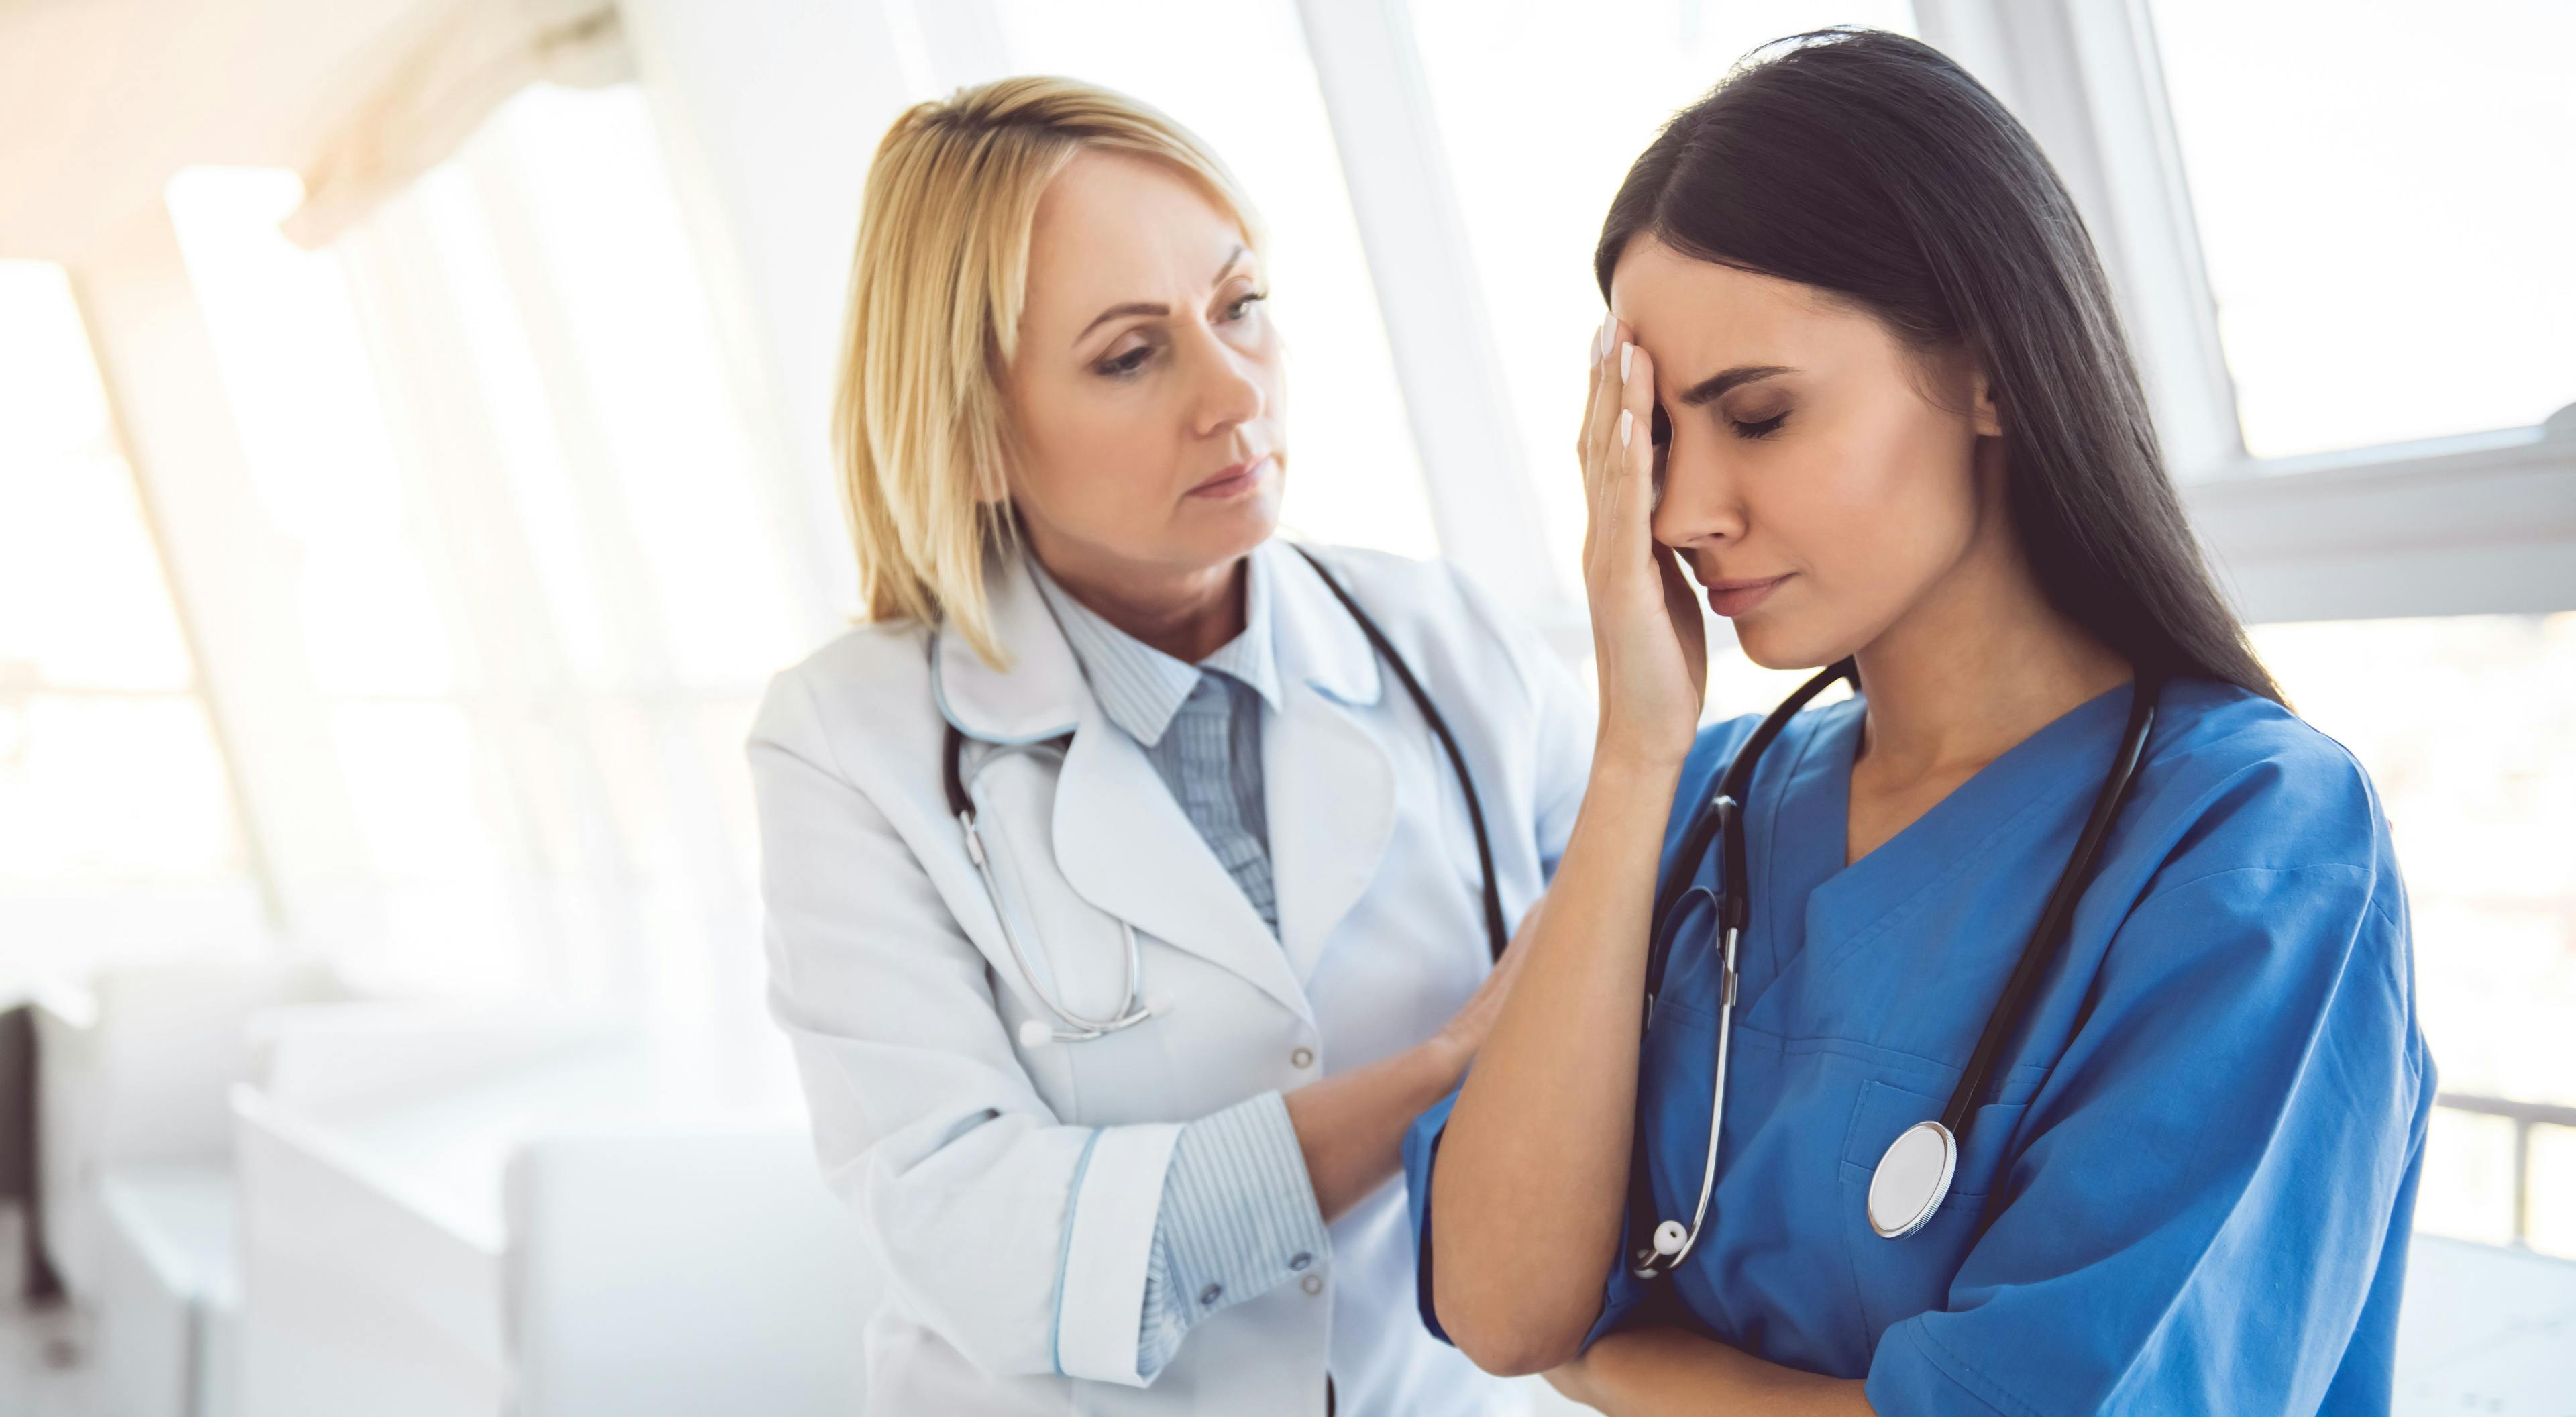 Compassion Fatigue, Burnout, or Both? What Can Oncology Nurses Do to Help Each Other?